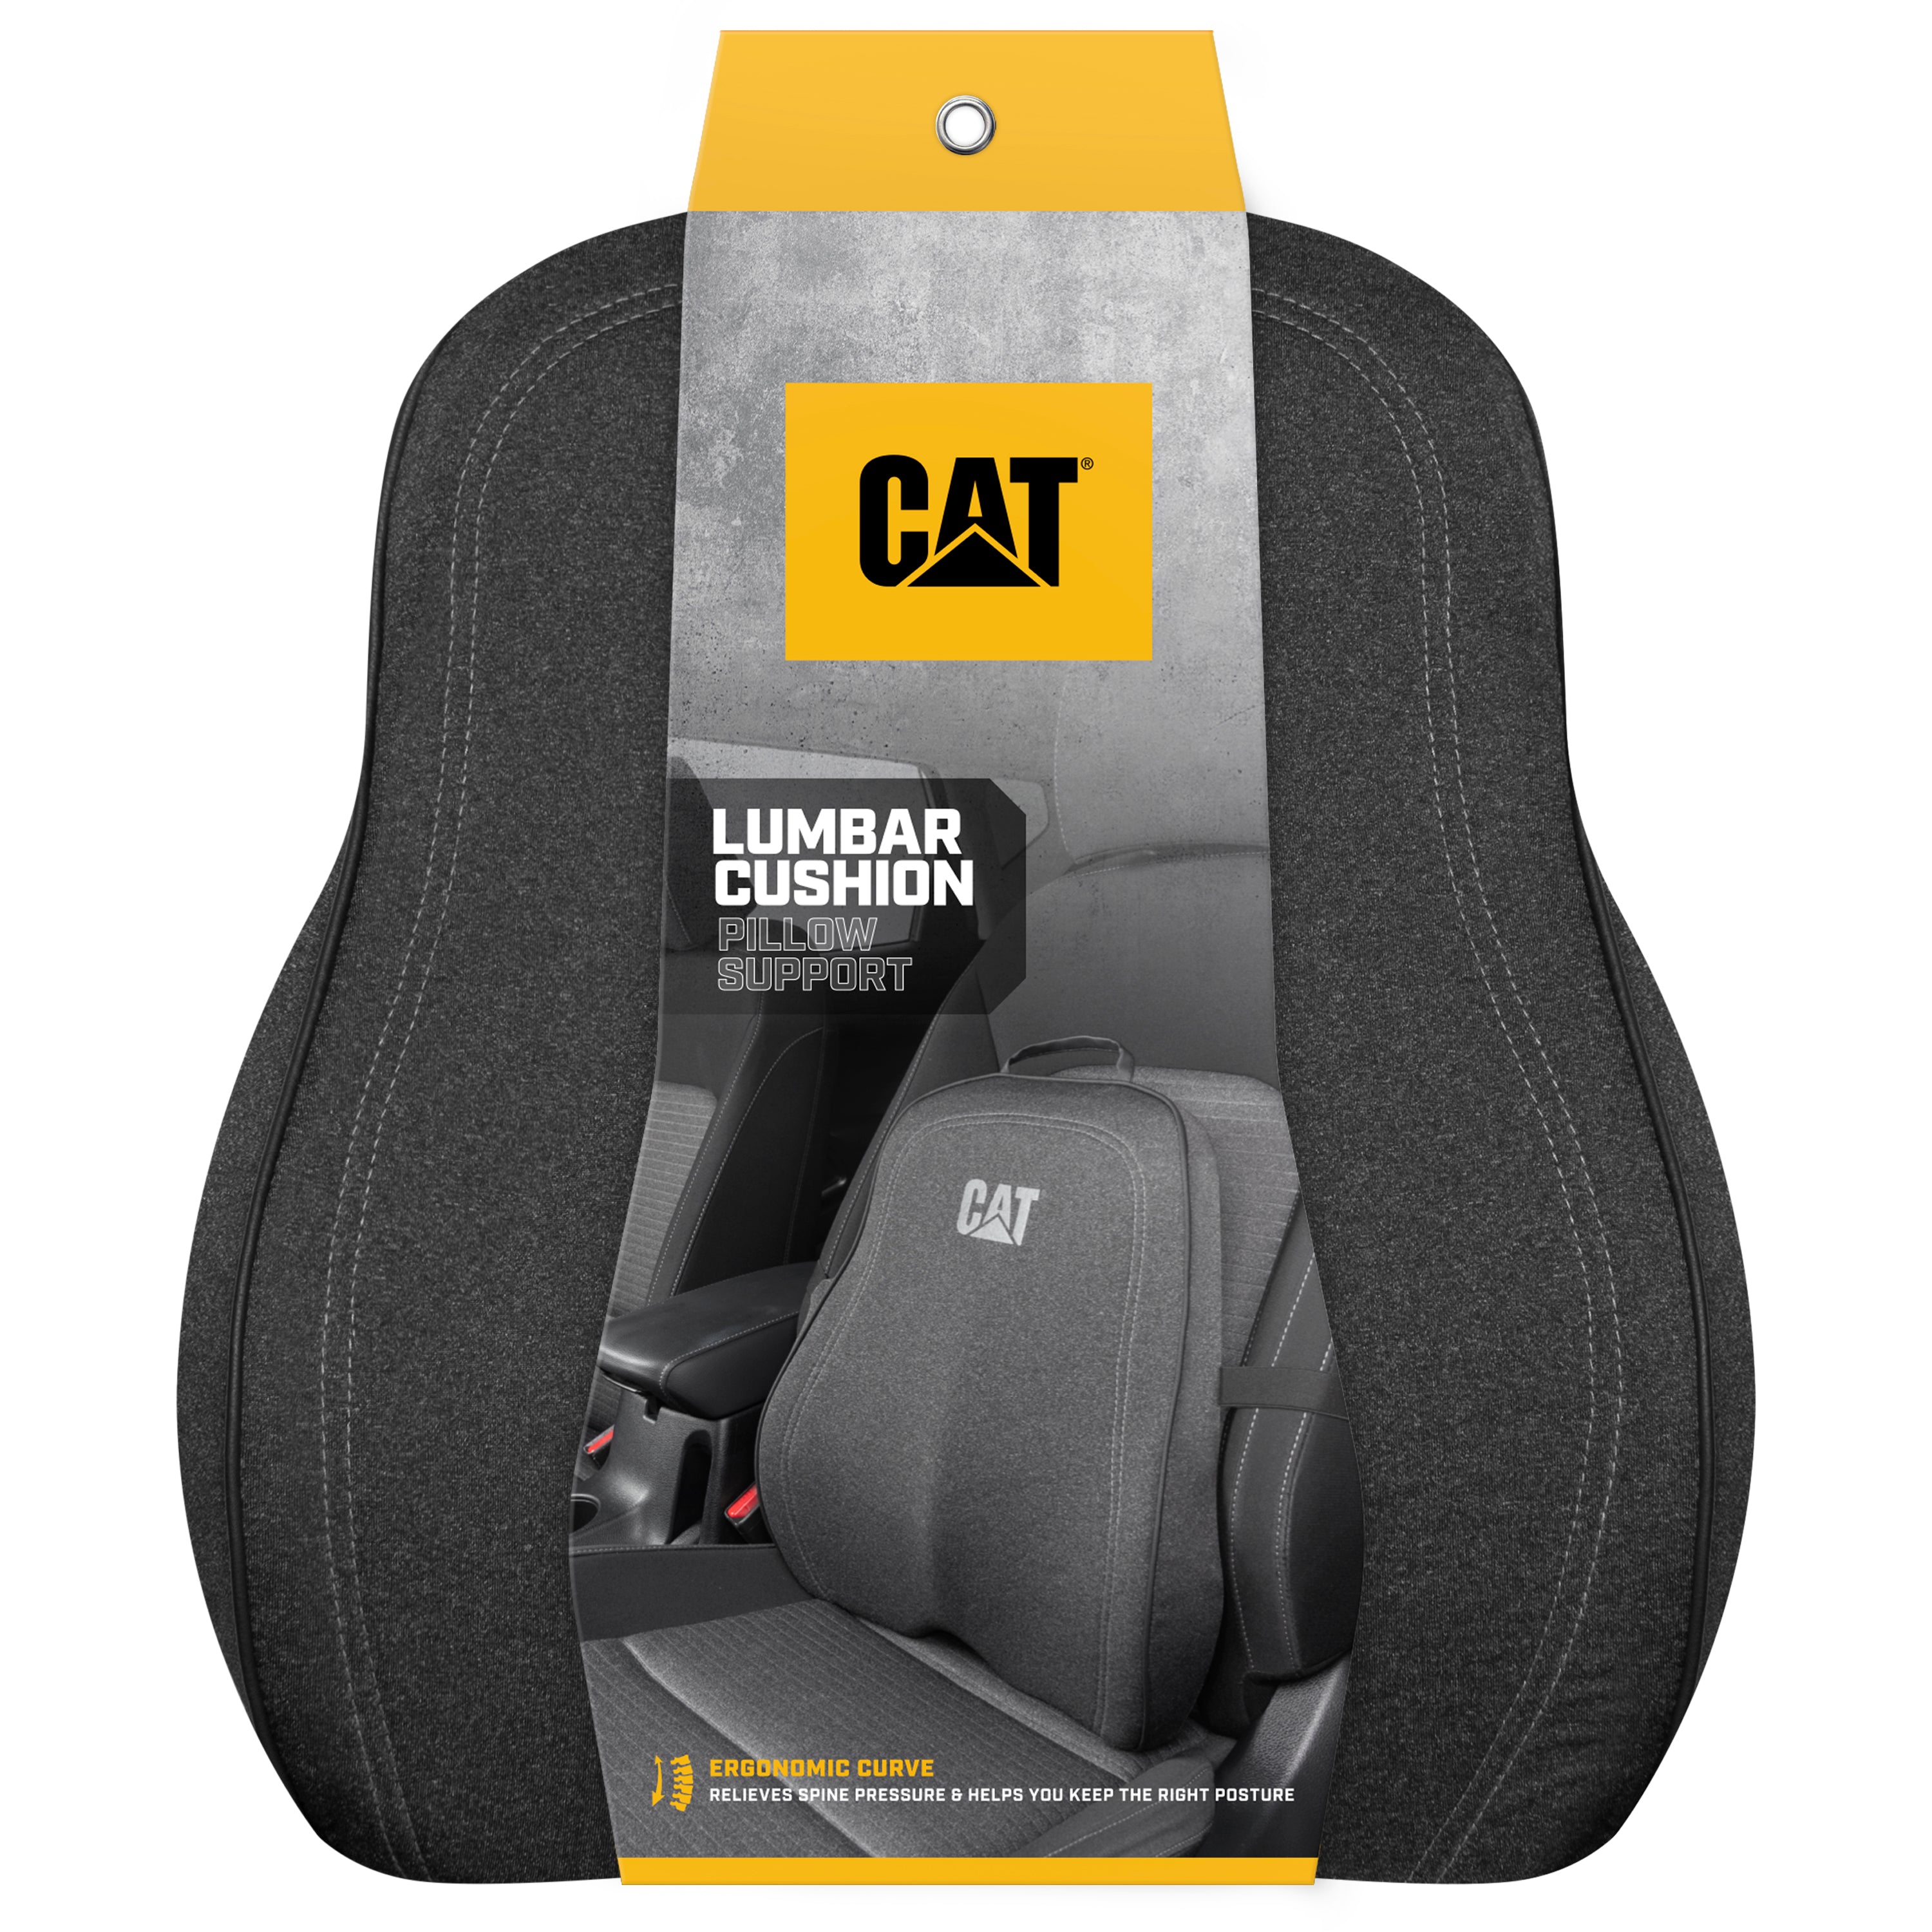 Cat® Big Lumbar Support Cushion for Cars Trucks SUVs - Ergonomic Back Support for Comfortable Driving - Gray